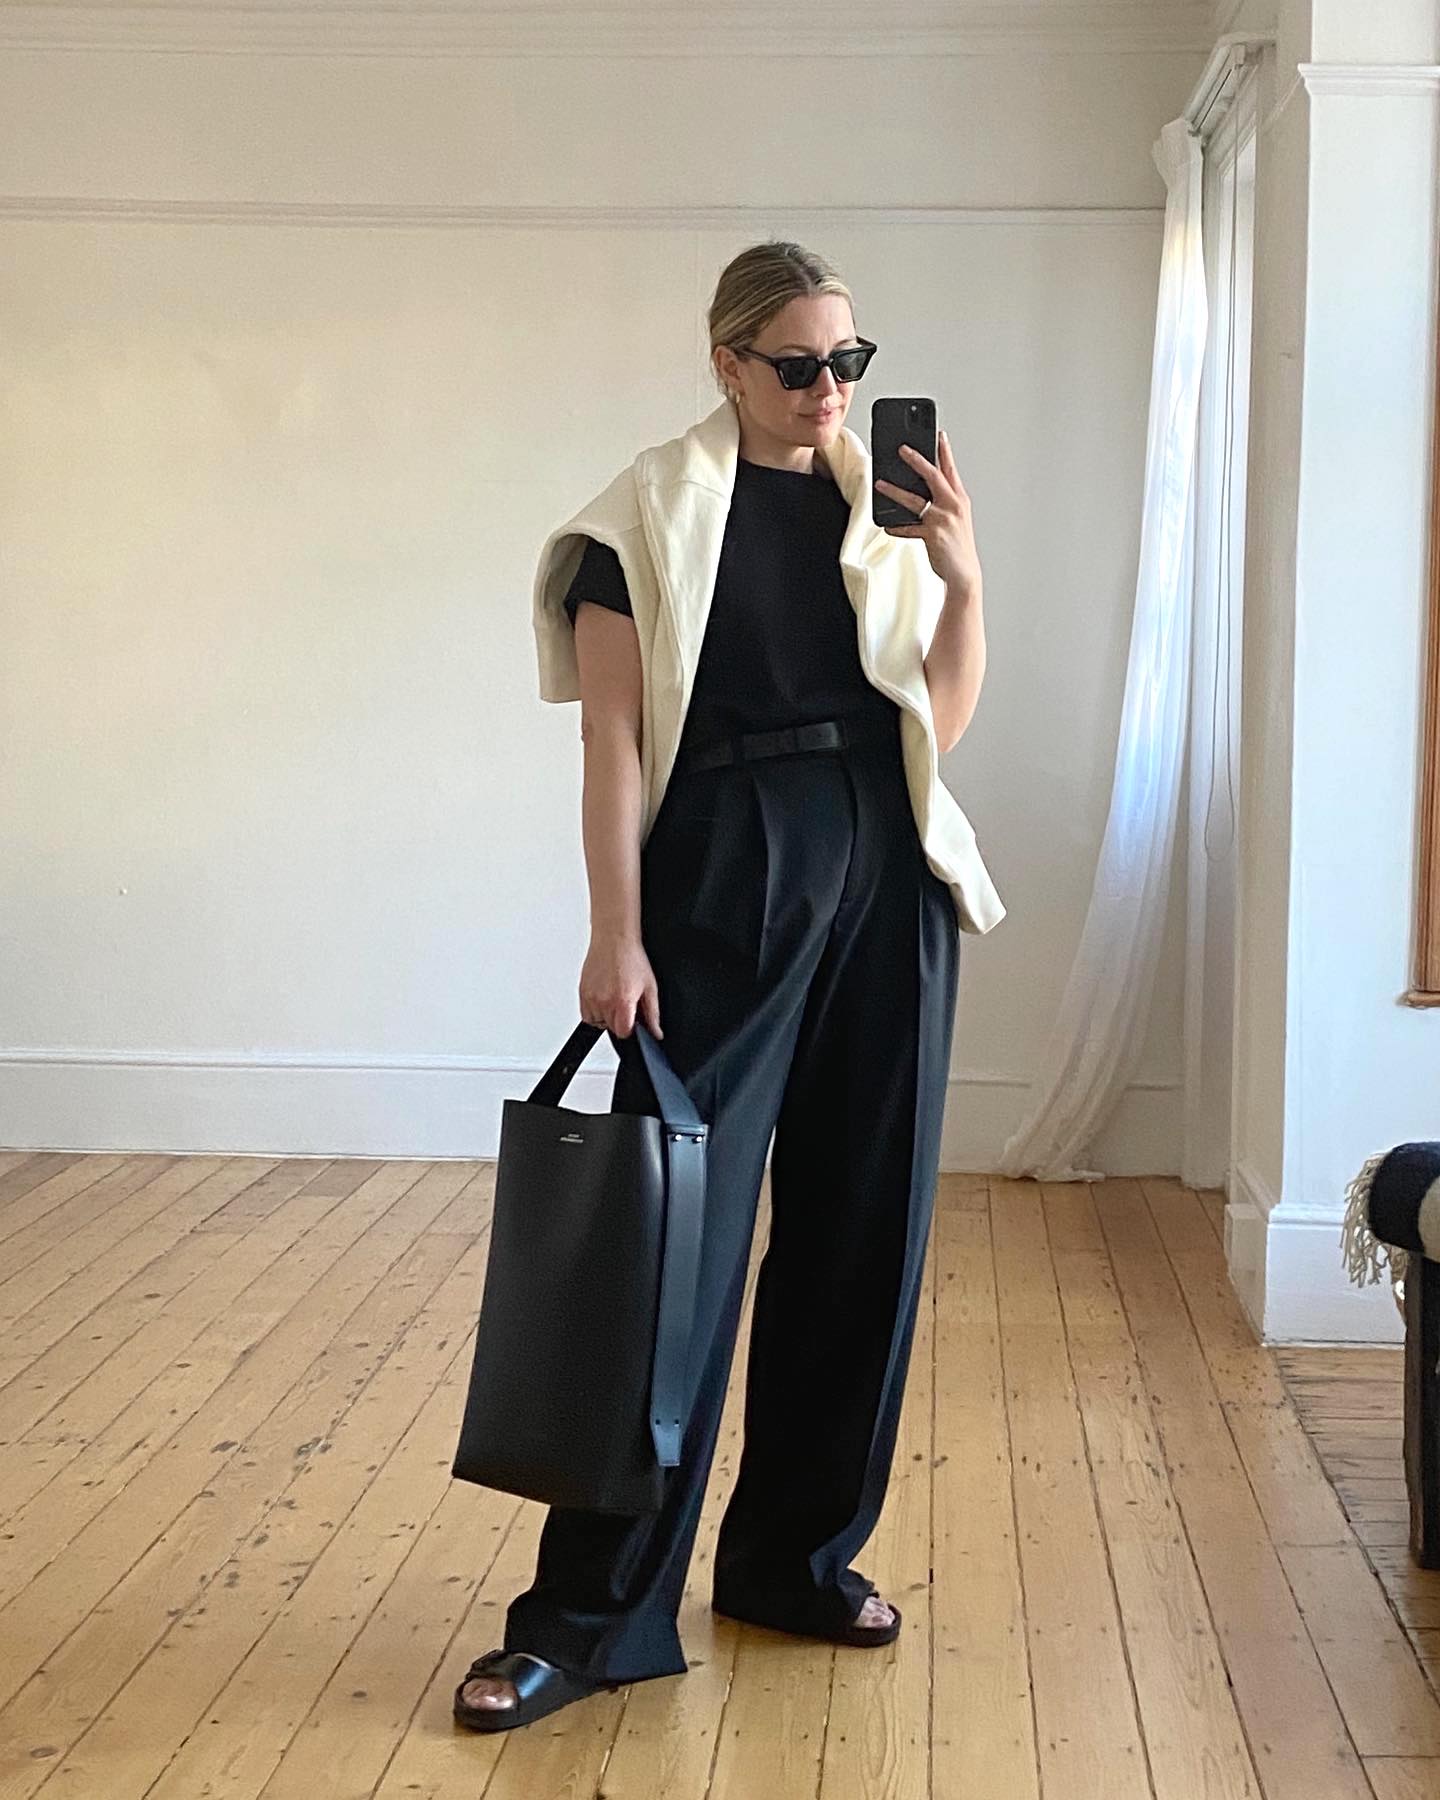 British fashion influencer Alexis Forman standing in a spring outfit with black trousers